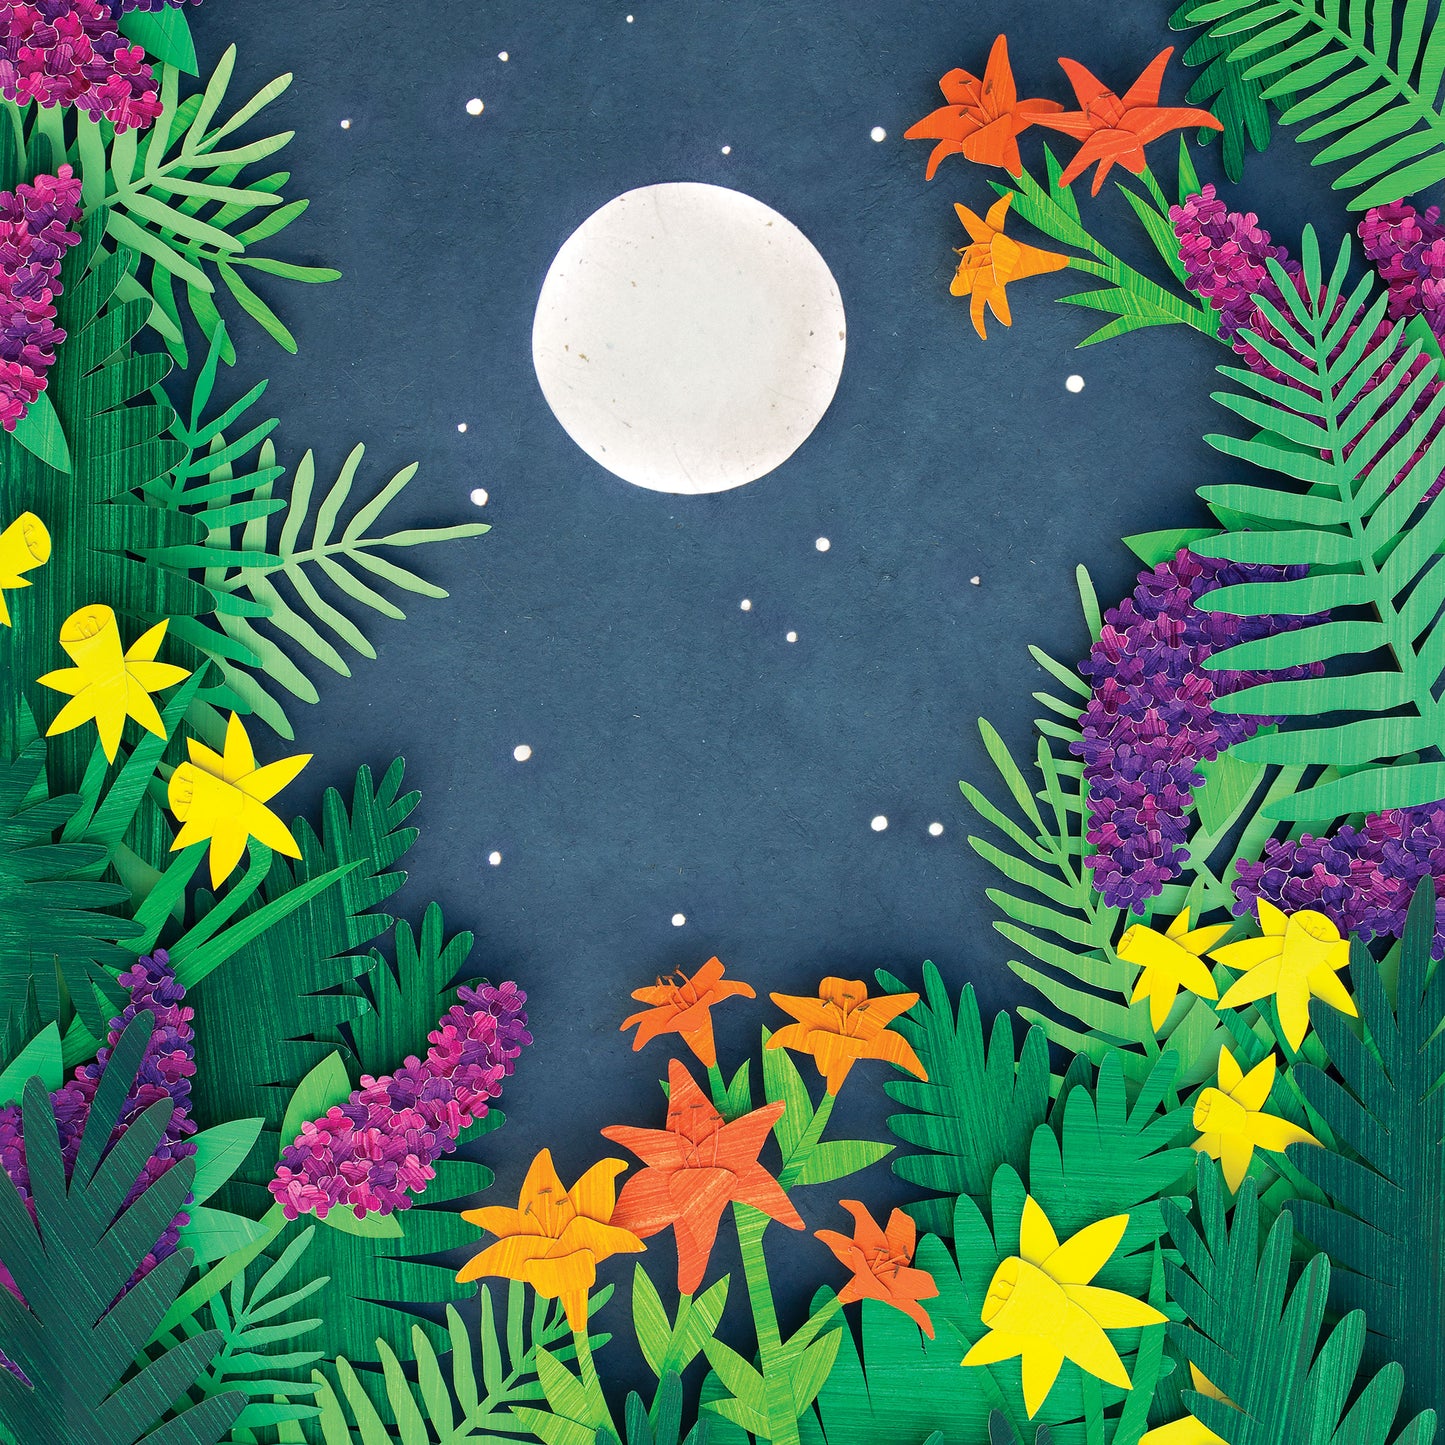 Archival print of cut paper illustration of night scene with full moon and stars rising framed by flowers and ferns with image dimensions.